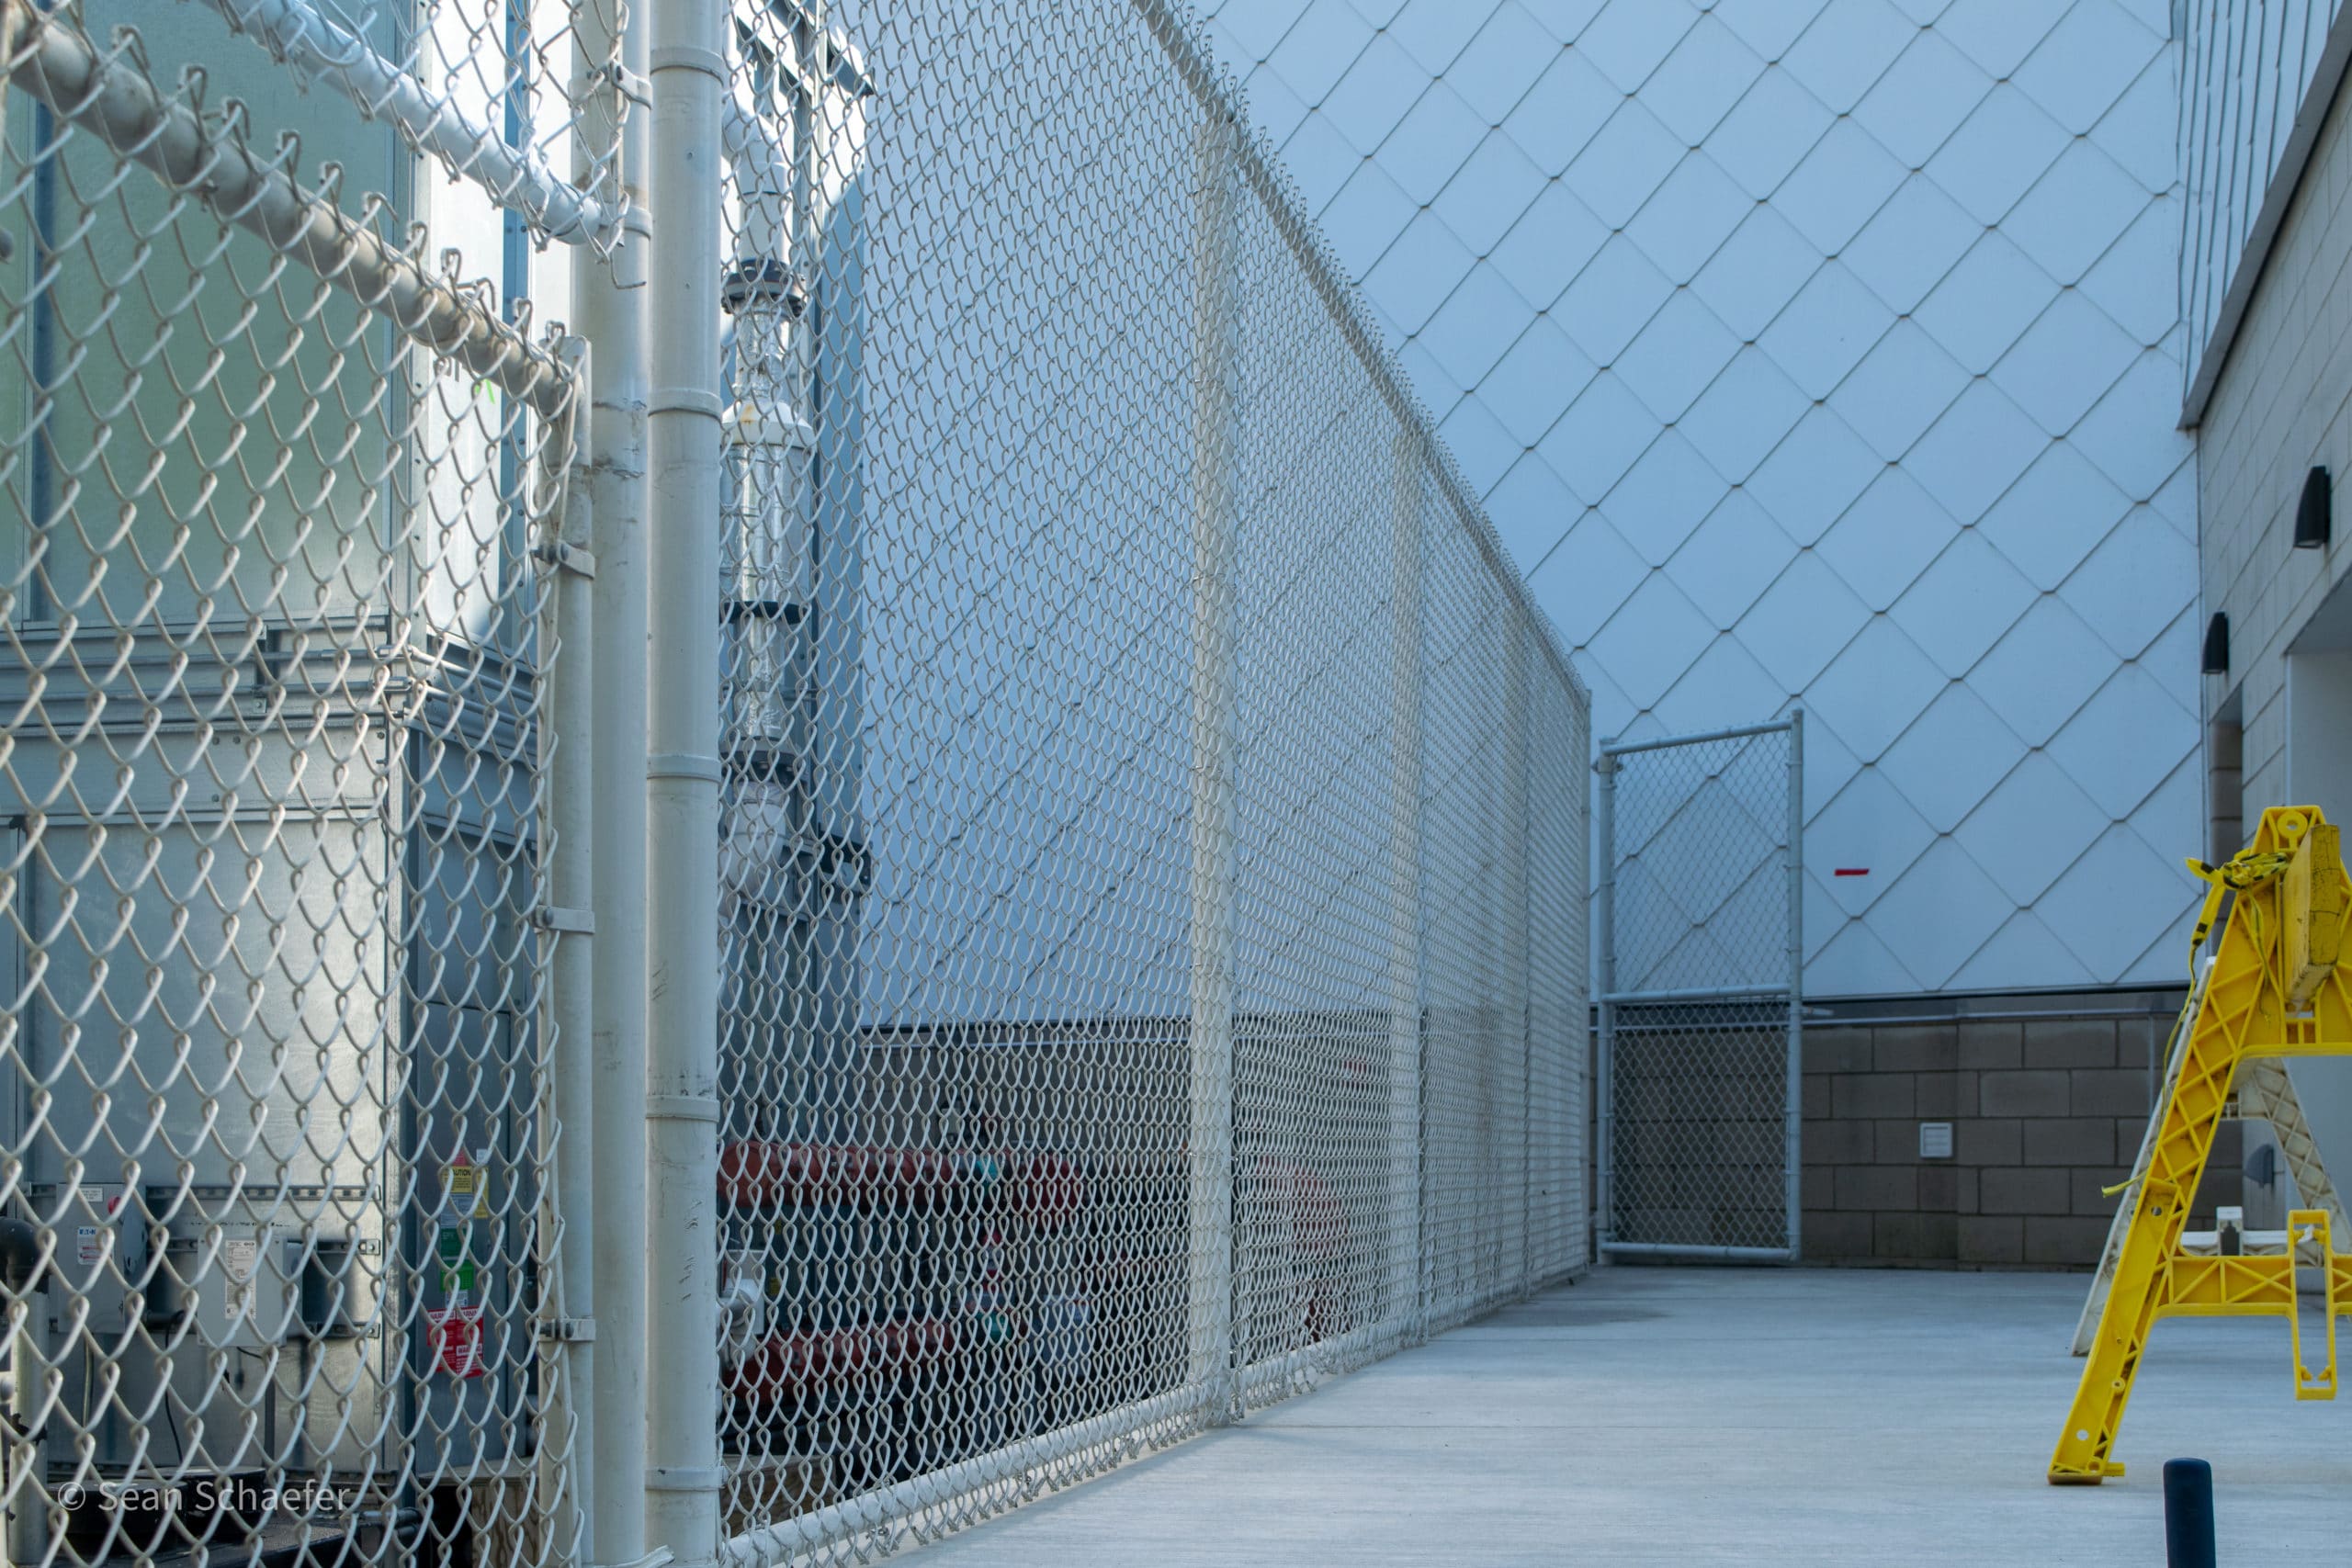 Image of commercial chain link fencing and gates at the Detroit Zoological Society